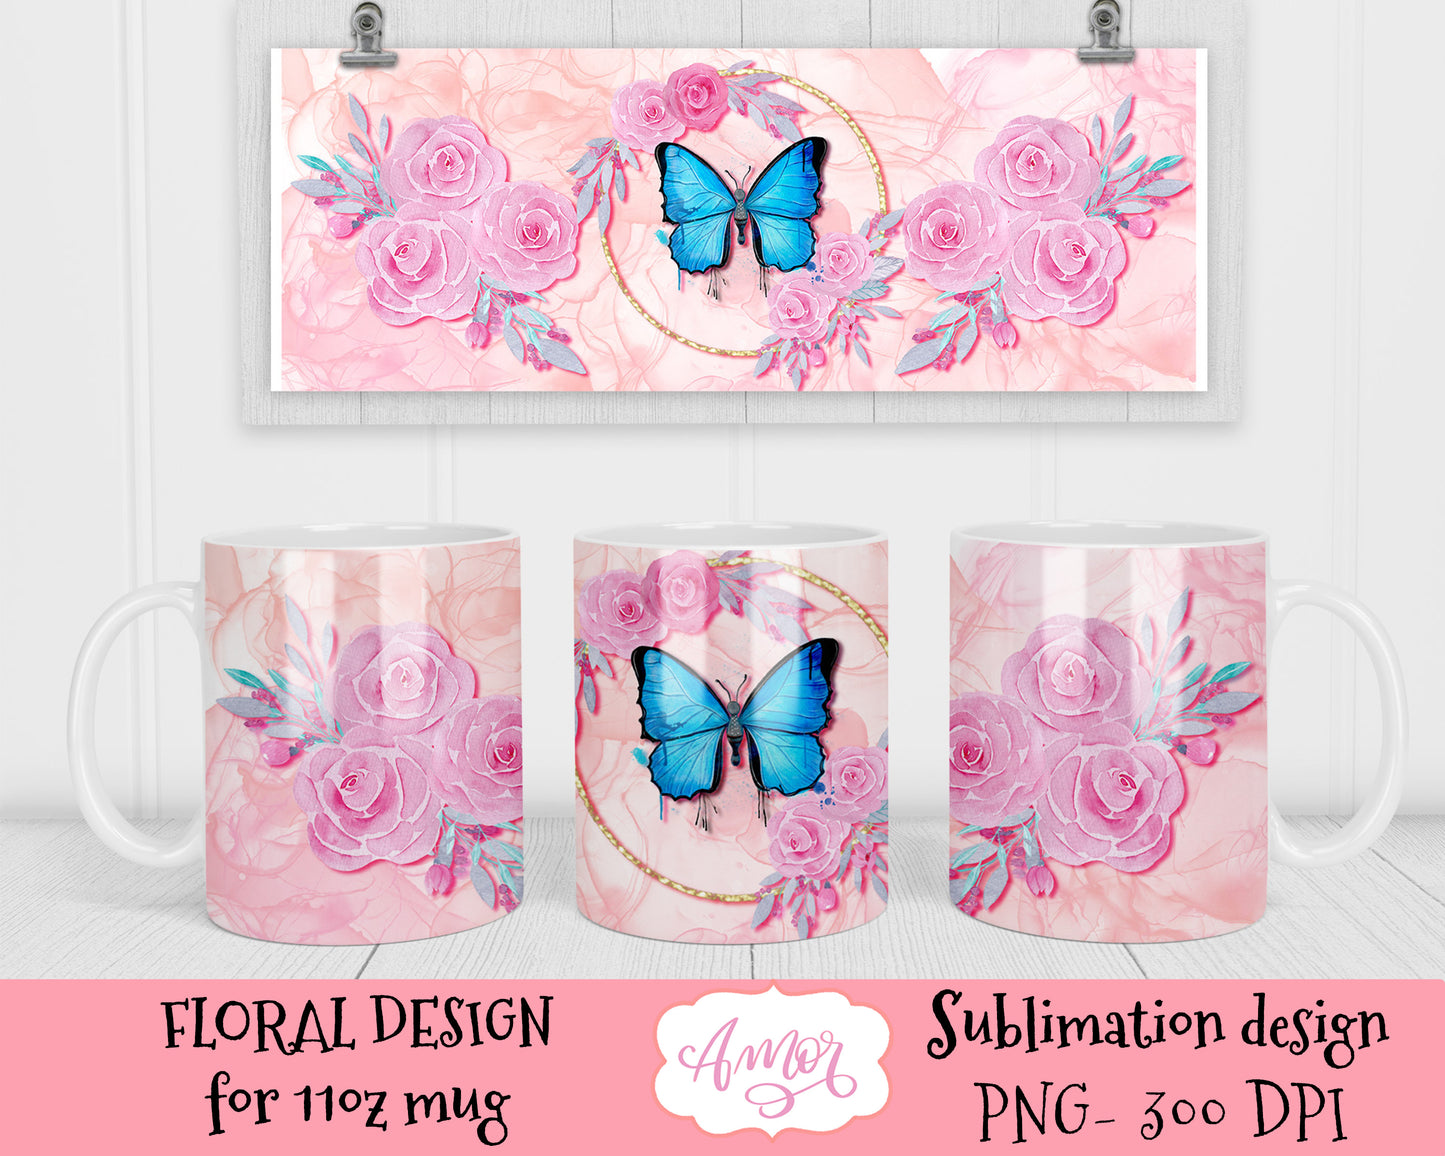 Blue Butterfly and Roses mug design for sublimation